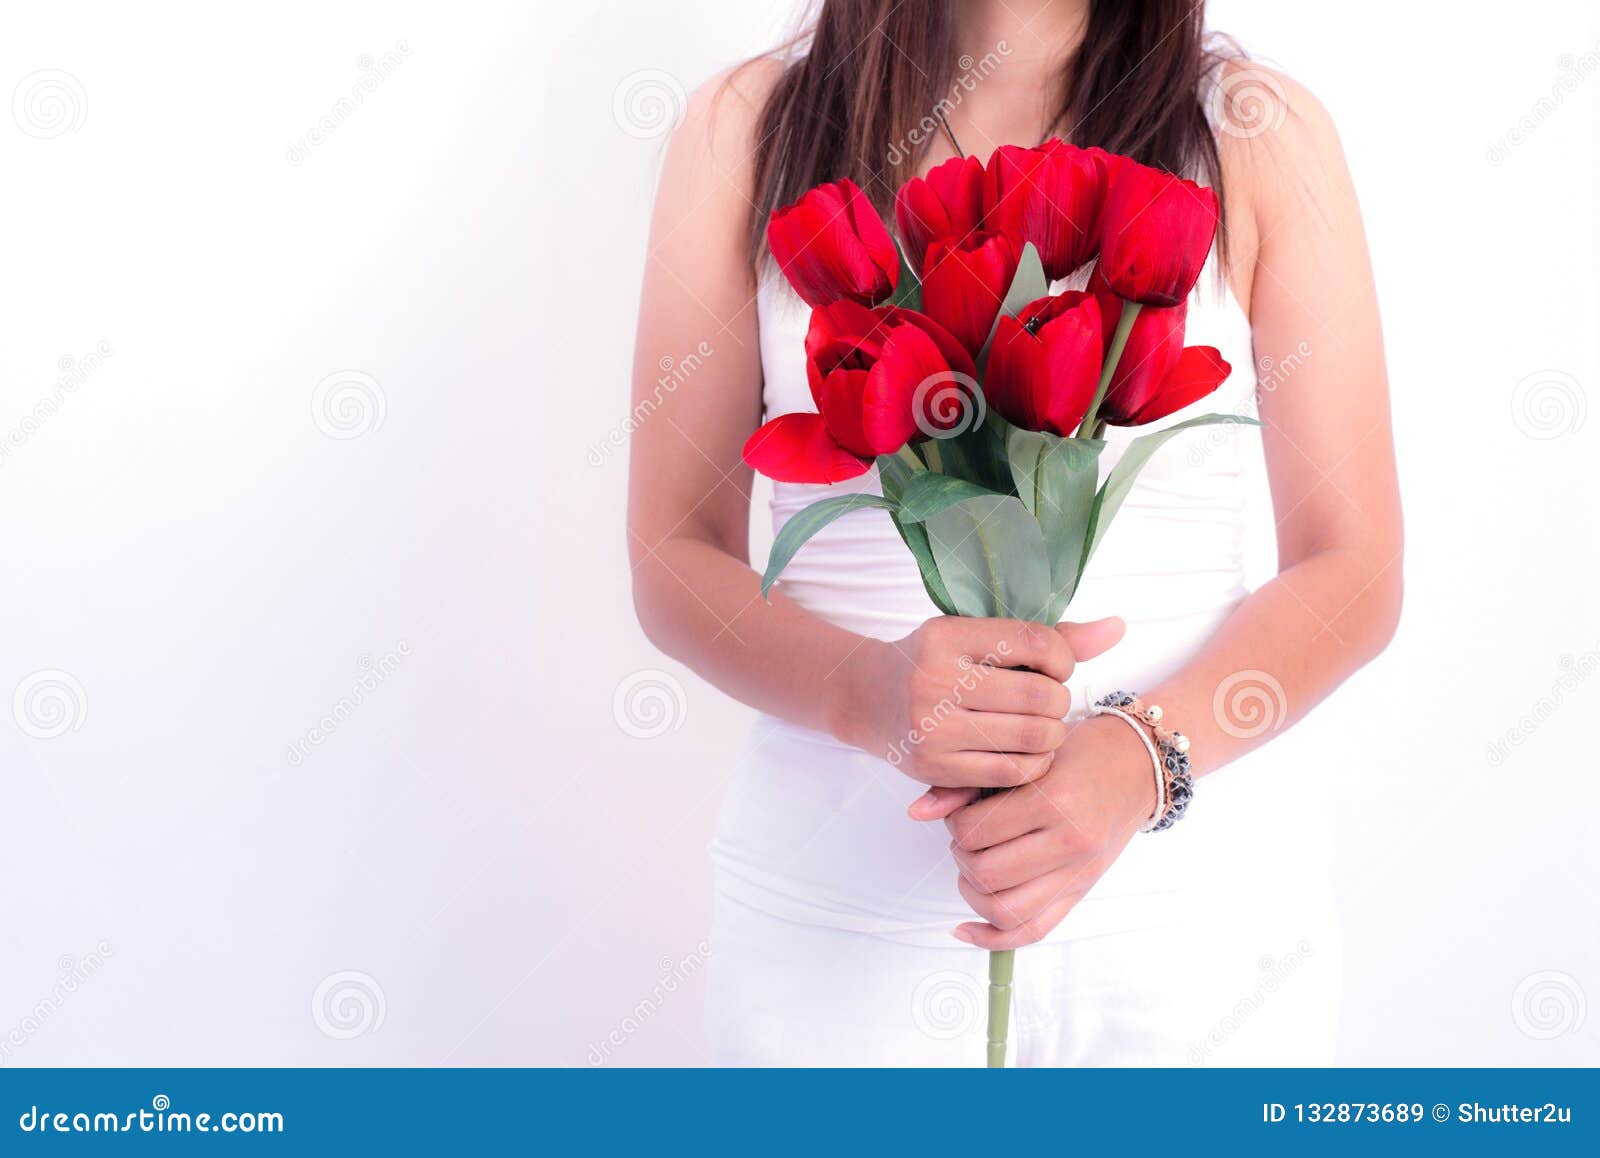 Woman Holding Red Rose Flower Valentines Day And Couples Conce Stock Image Image Of